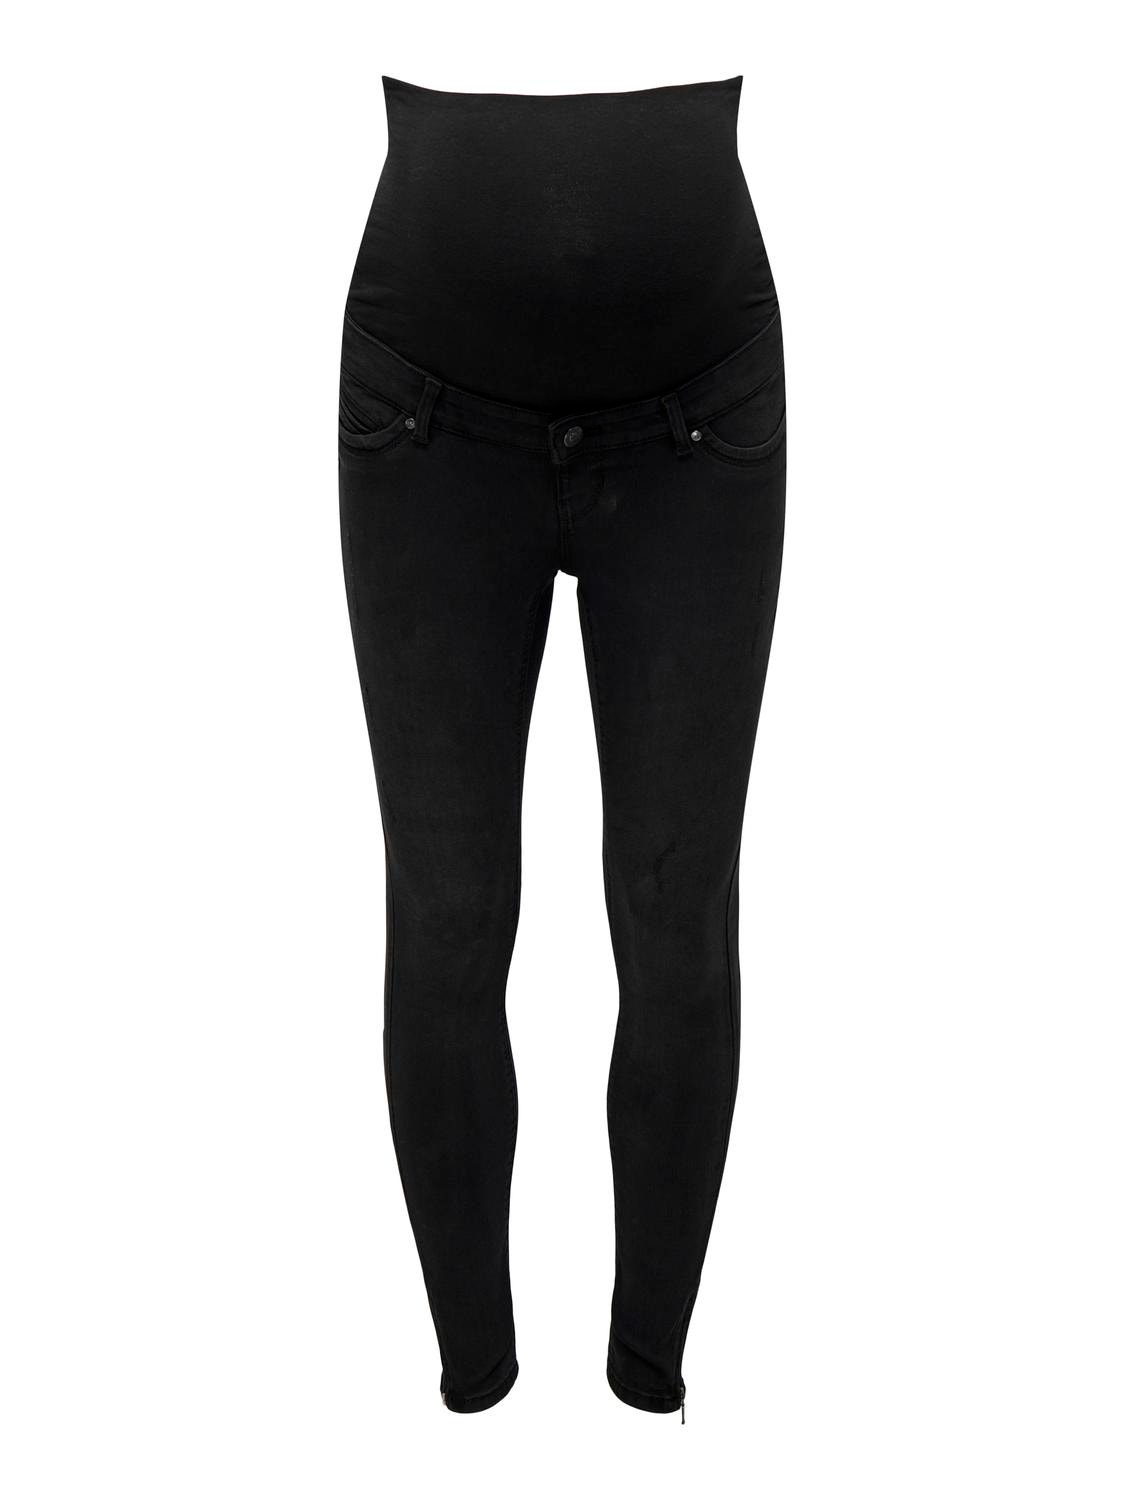 ONLY Mama OLMKendell ankle Skinny fit jeans -Washed Black - 15243182